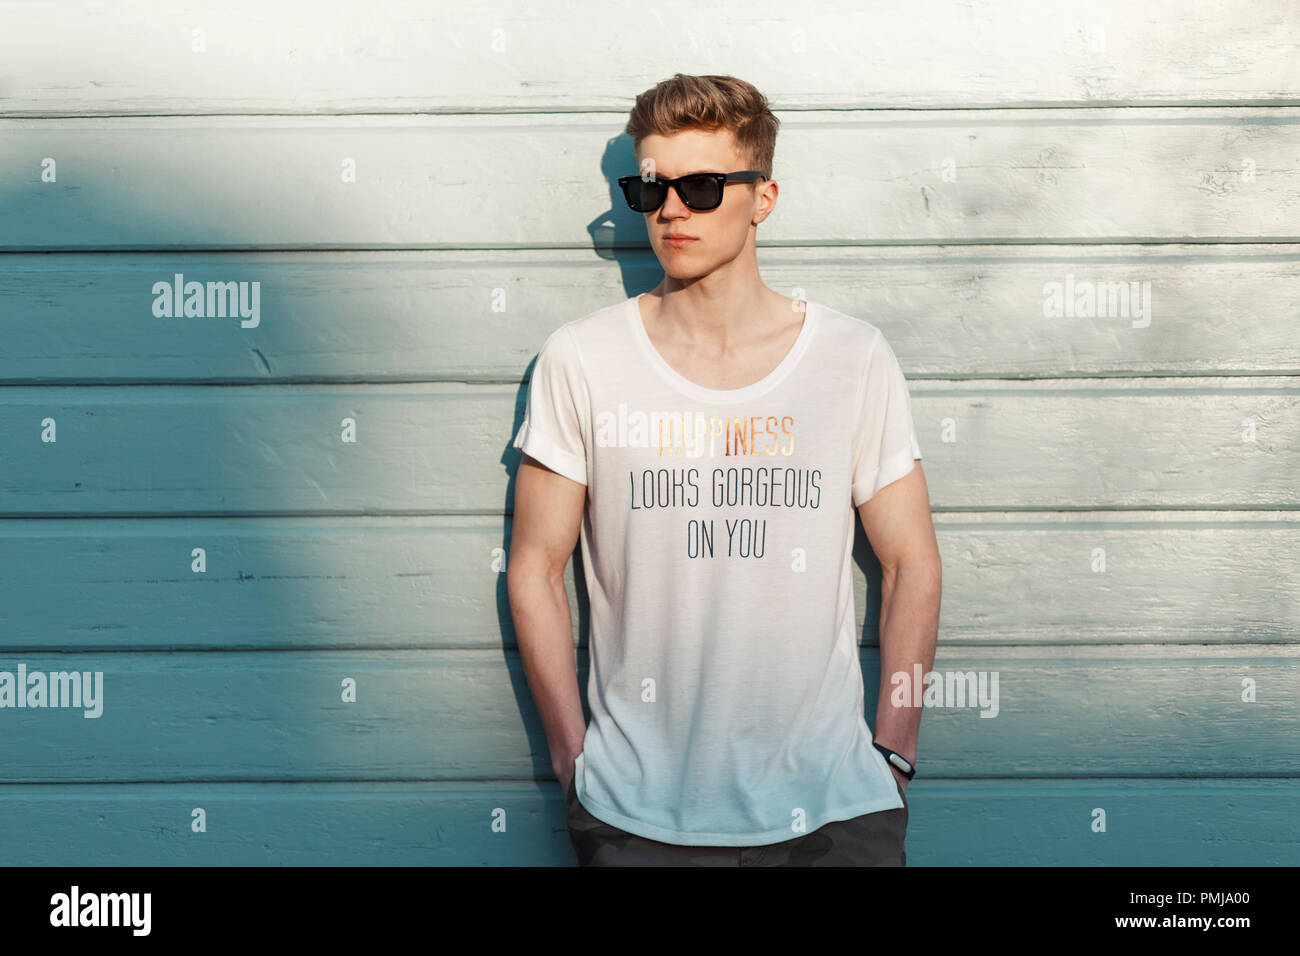 Stylish young man with sunglasses in a fashion white T-shirt posing near a blue wooden wall on the beach Stock Photo